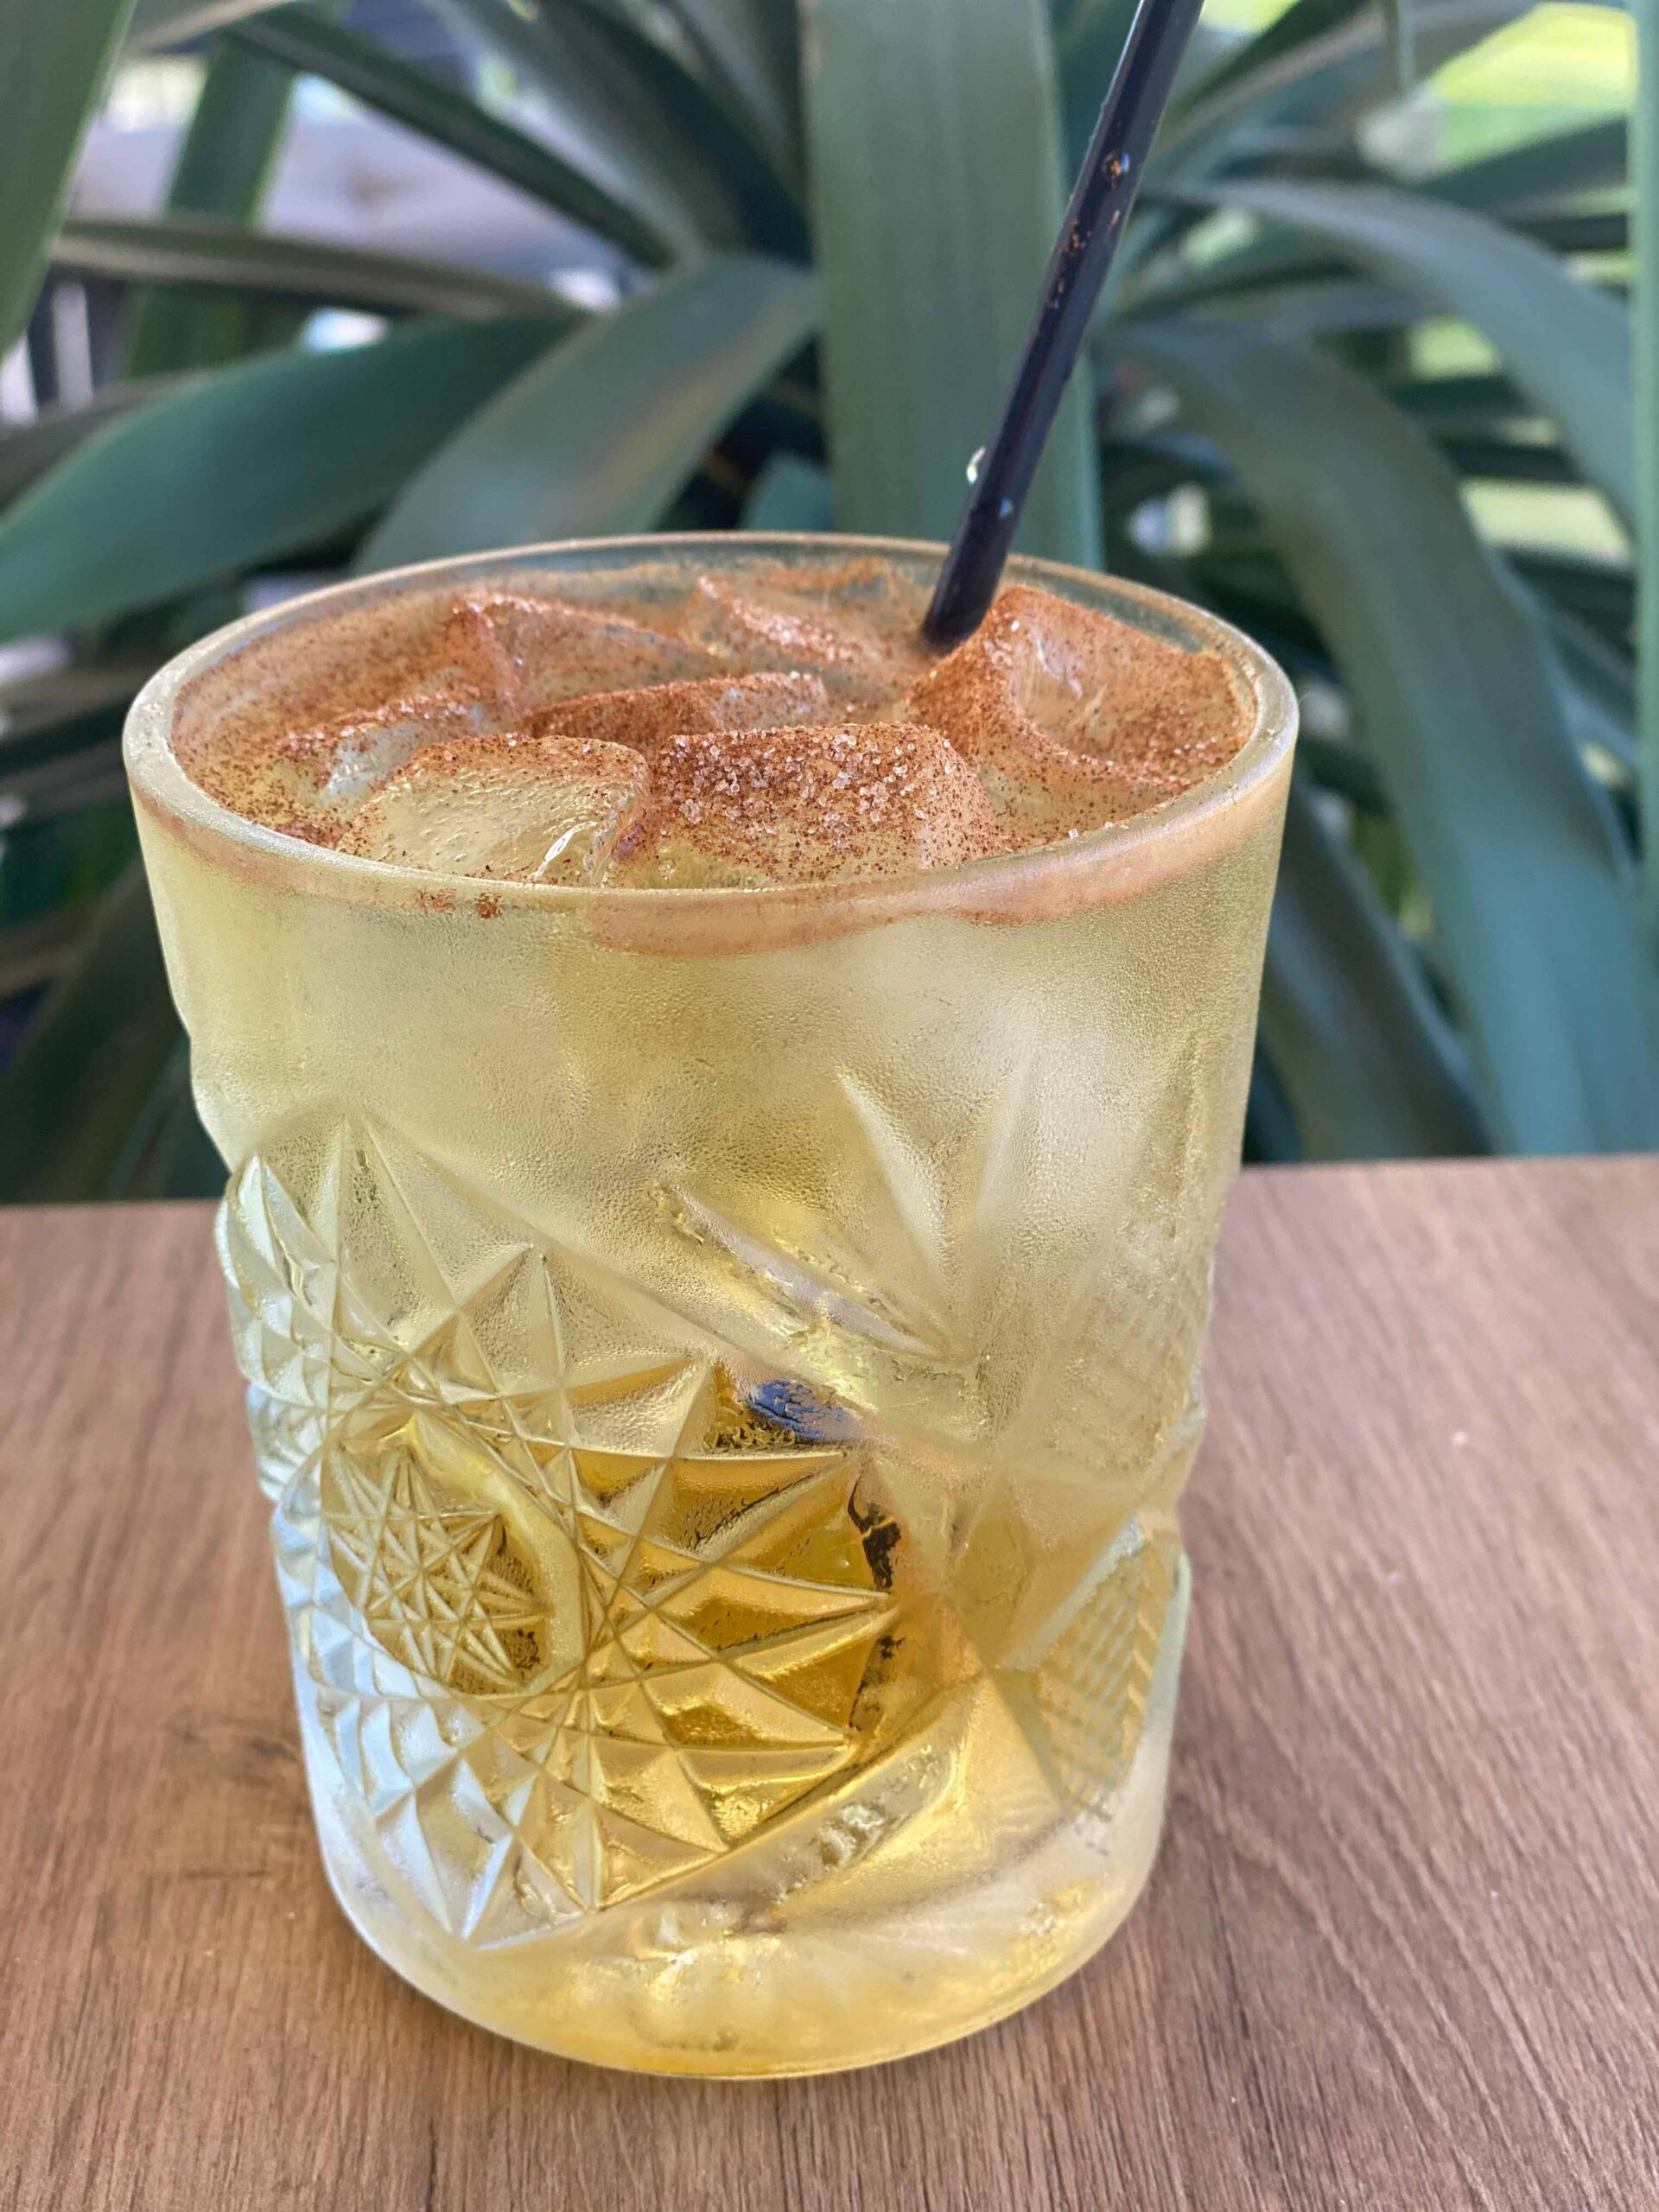 Apple crumble cocktail at Brothers Leagues Club available in June